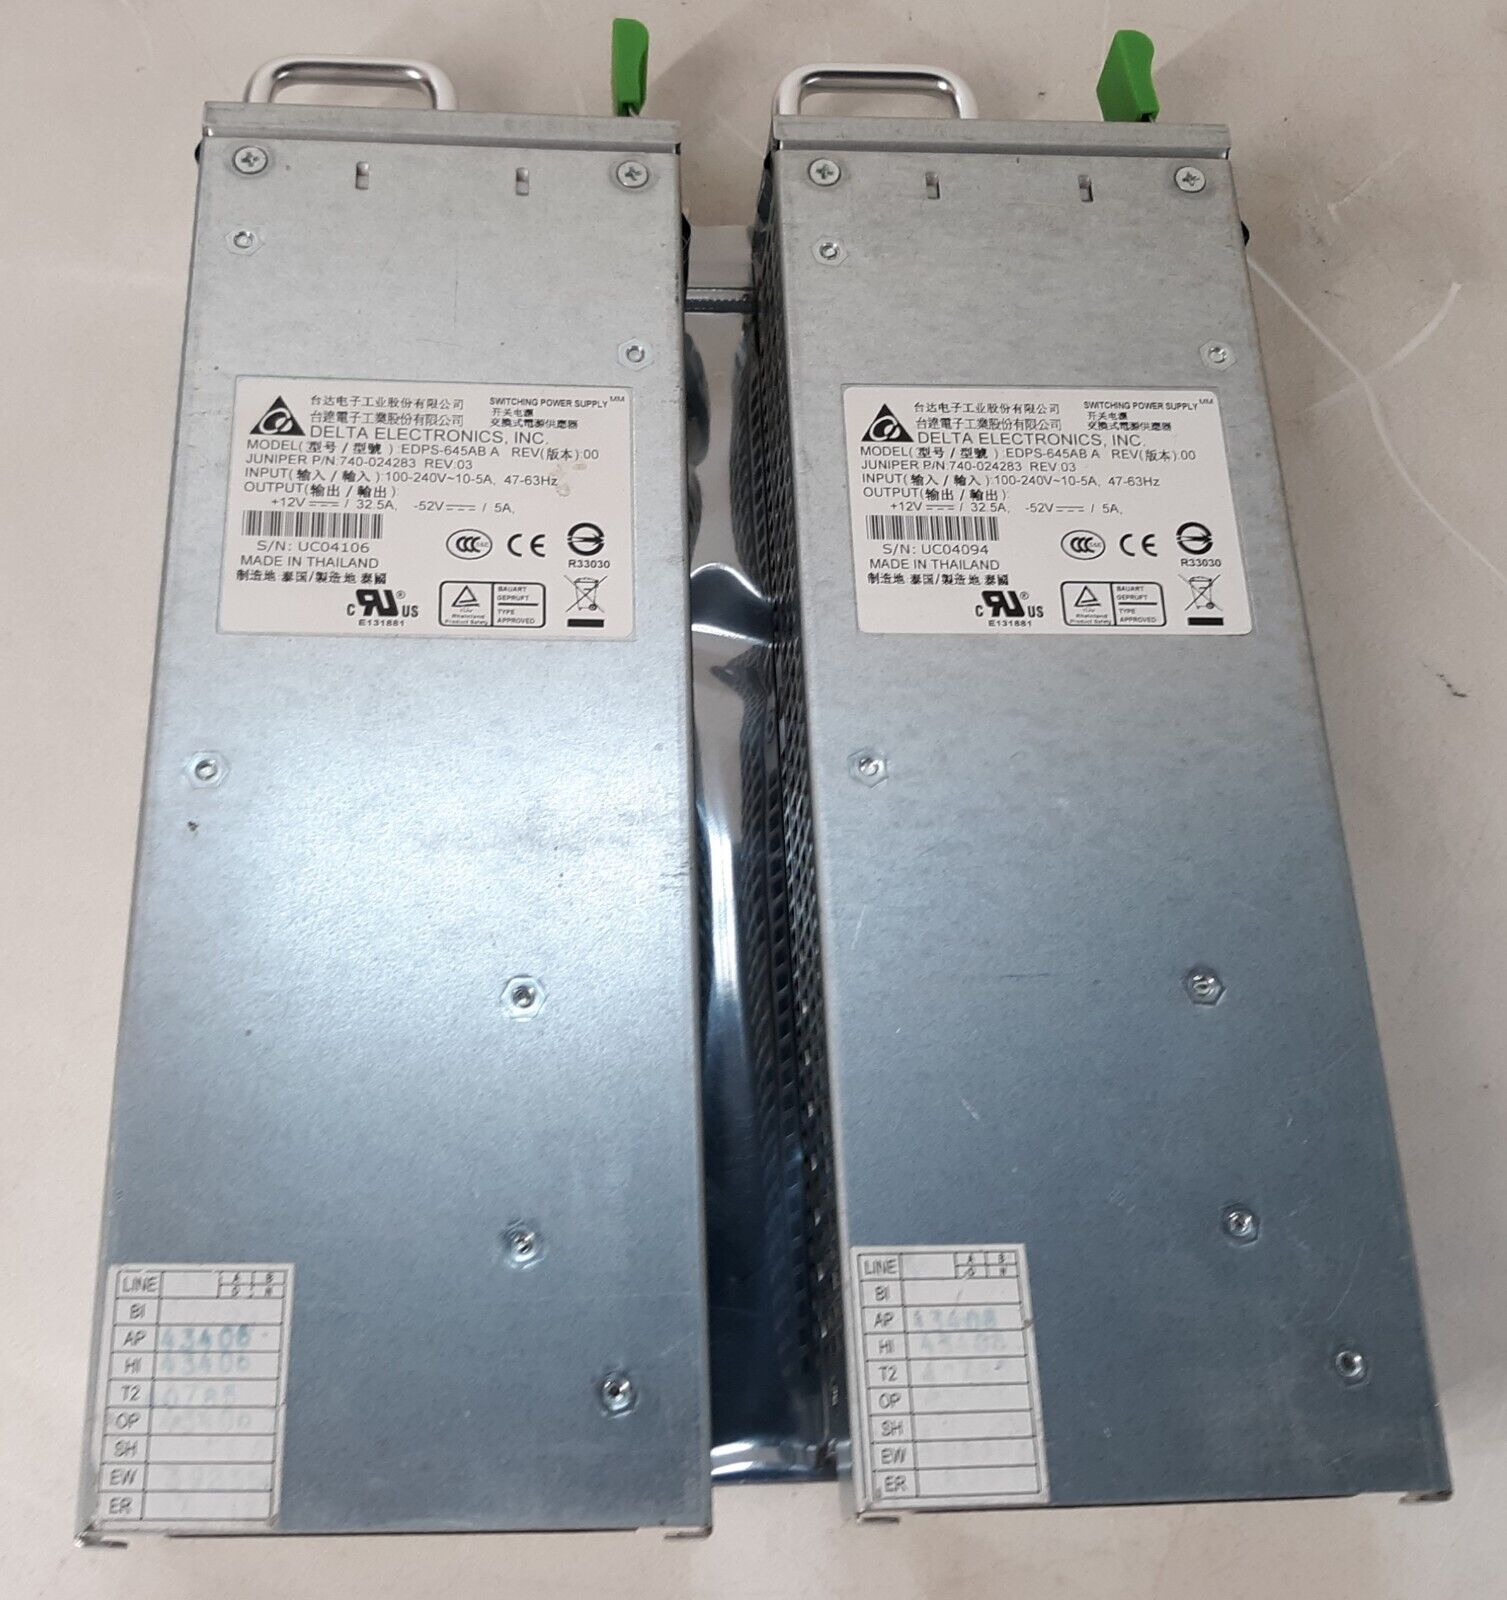 Pair of Juniper 740-024283 EDPS-645AB A Switching Power Supply *PULLED*